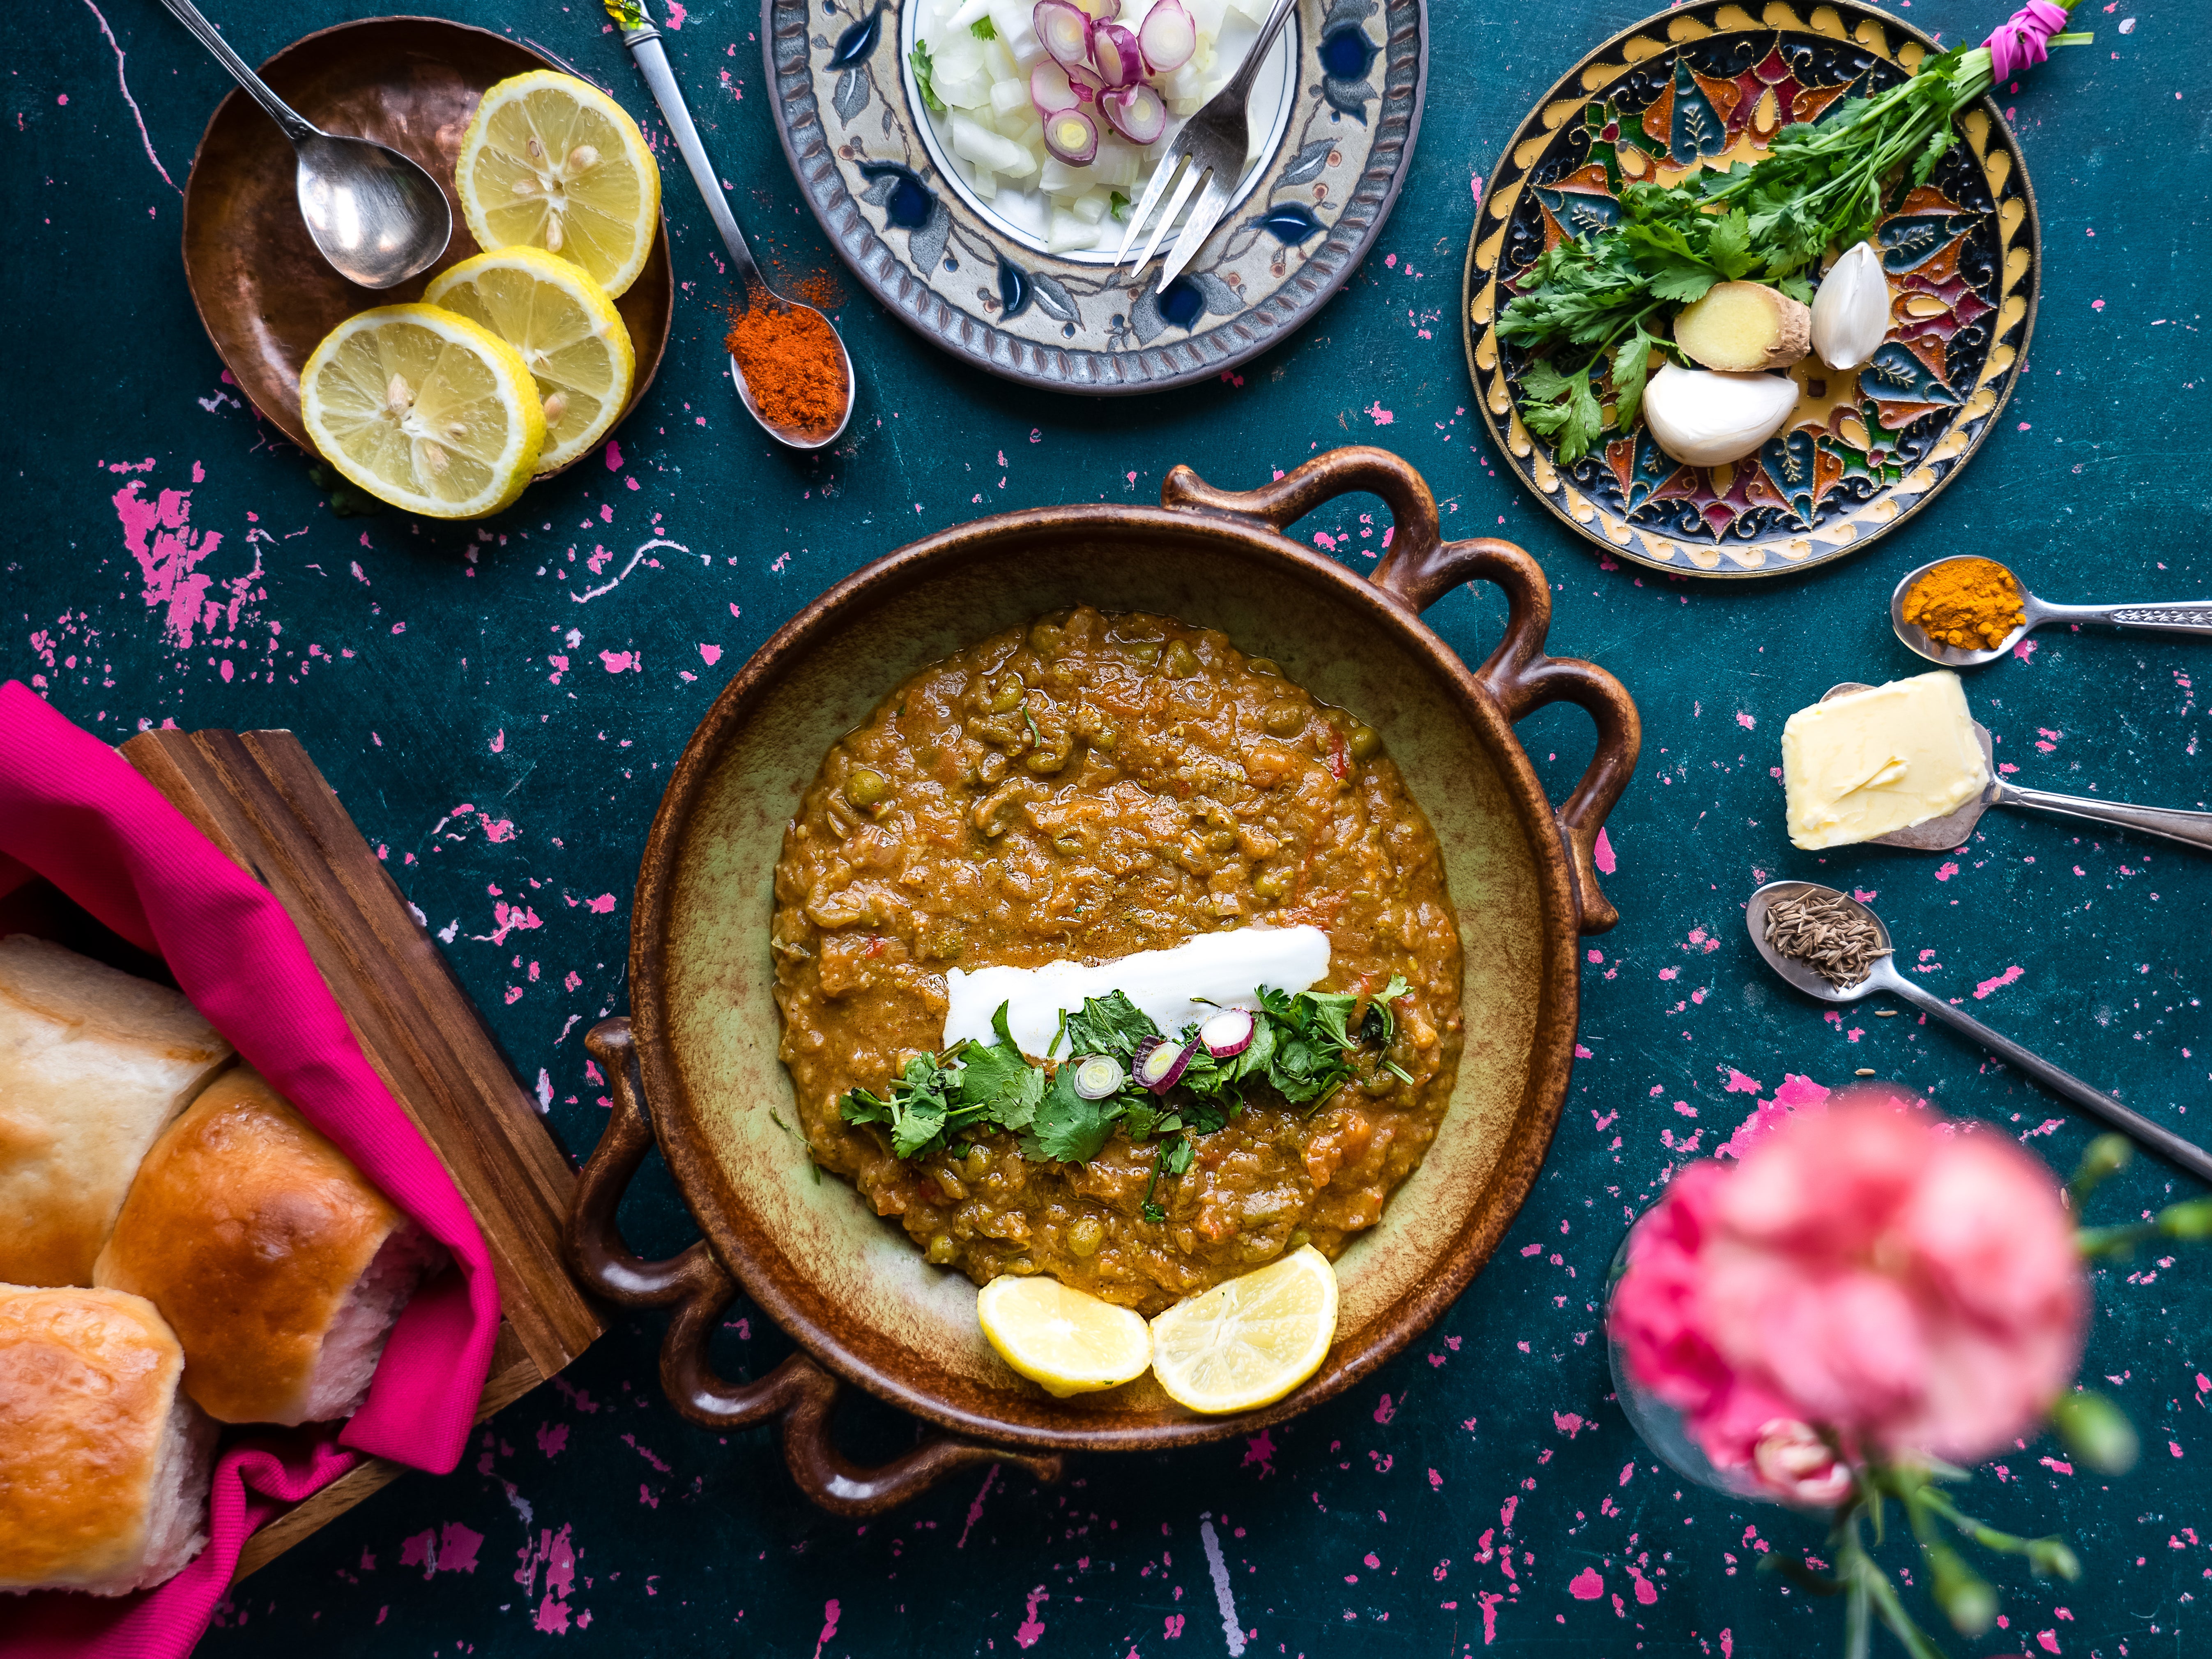 Originally a quick lunch option for textile mill workers in Mumbai, pav bhaji is now a popular street food and restaurant dish all over the country